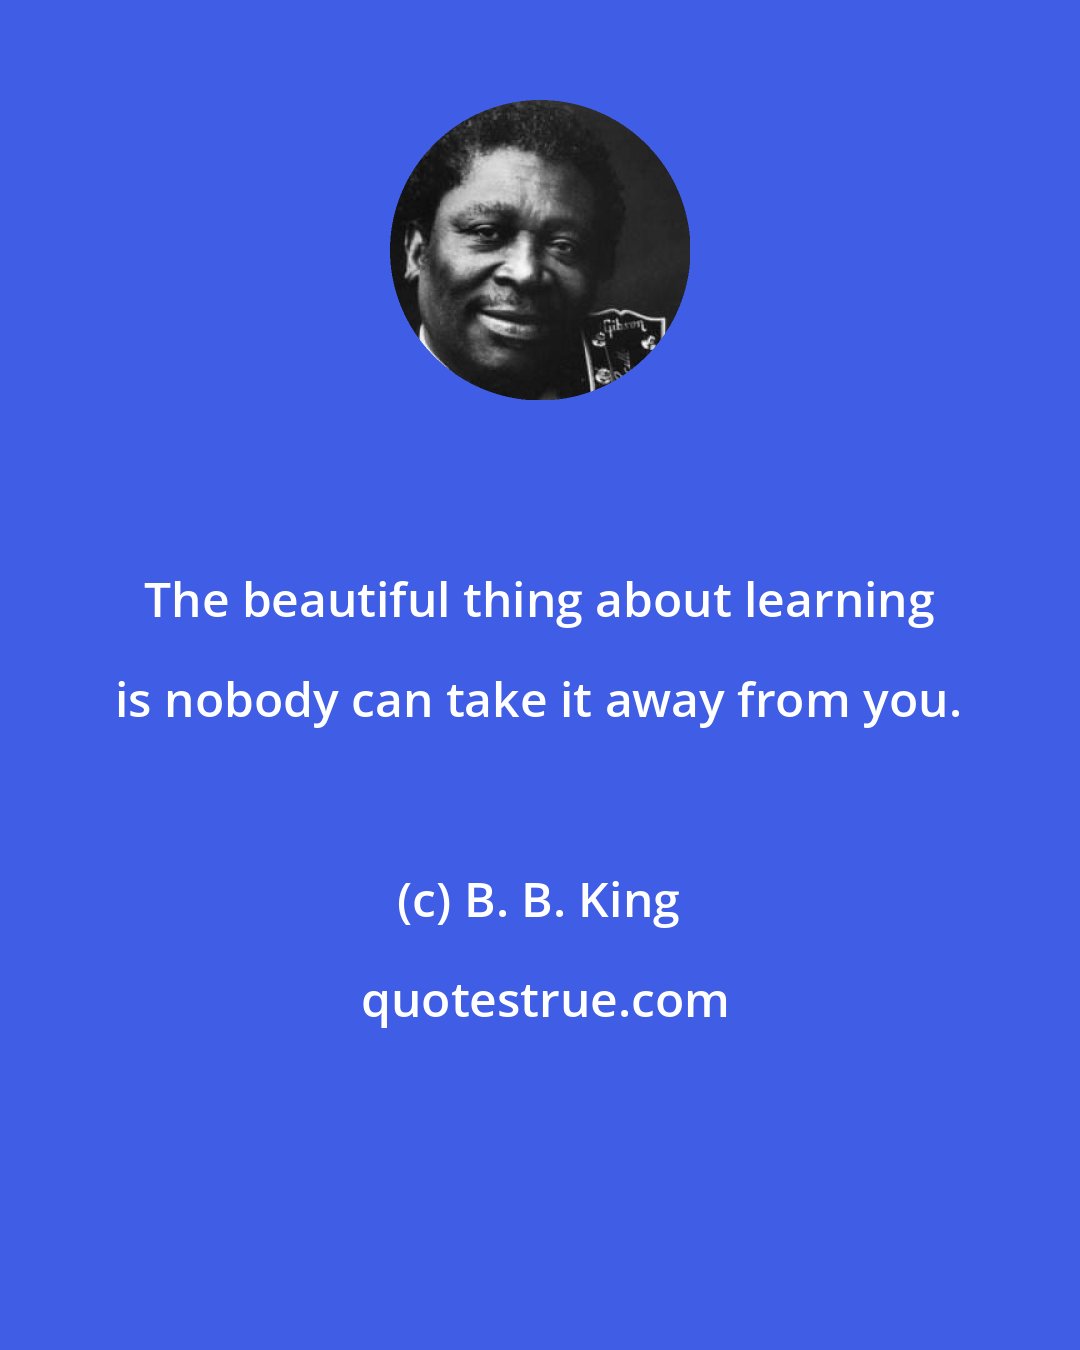 B. B. King: The beautiful thing about learning is nobody can take it away from you.